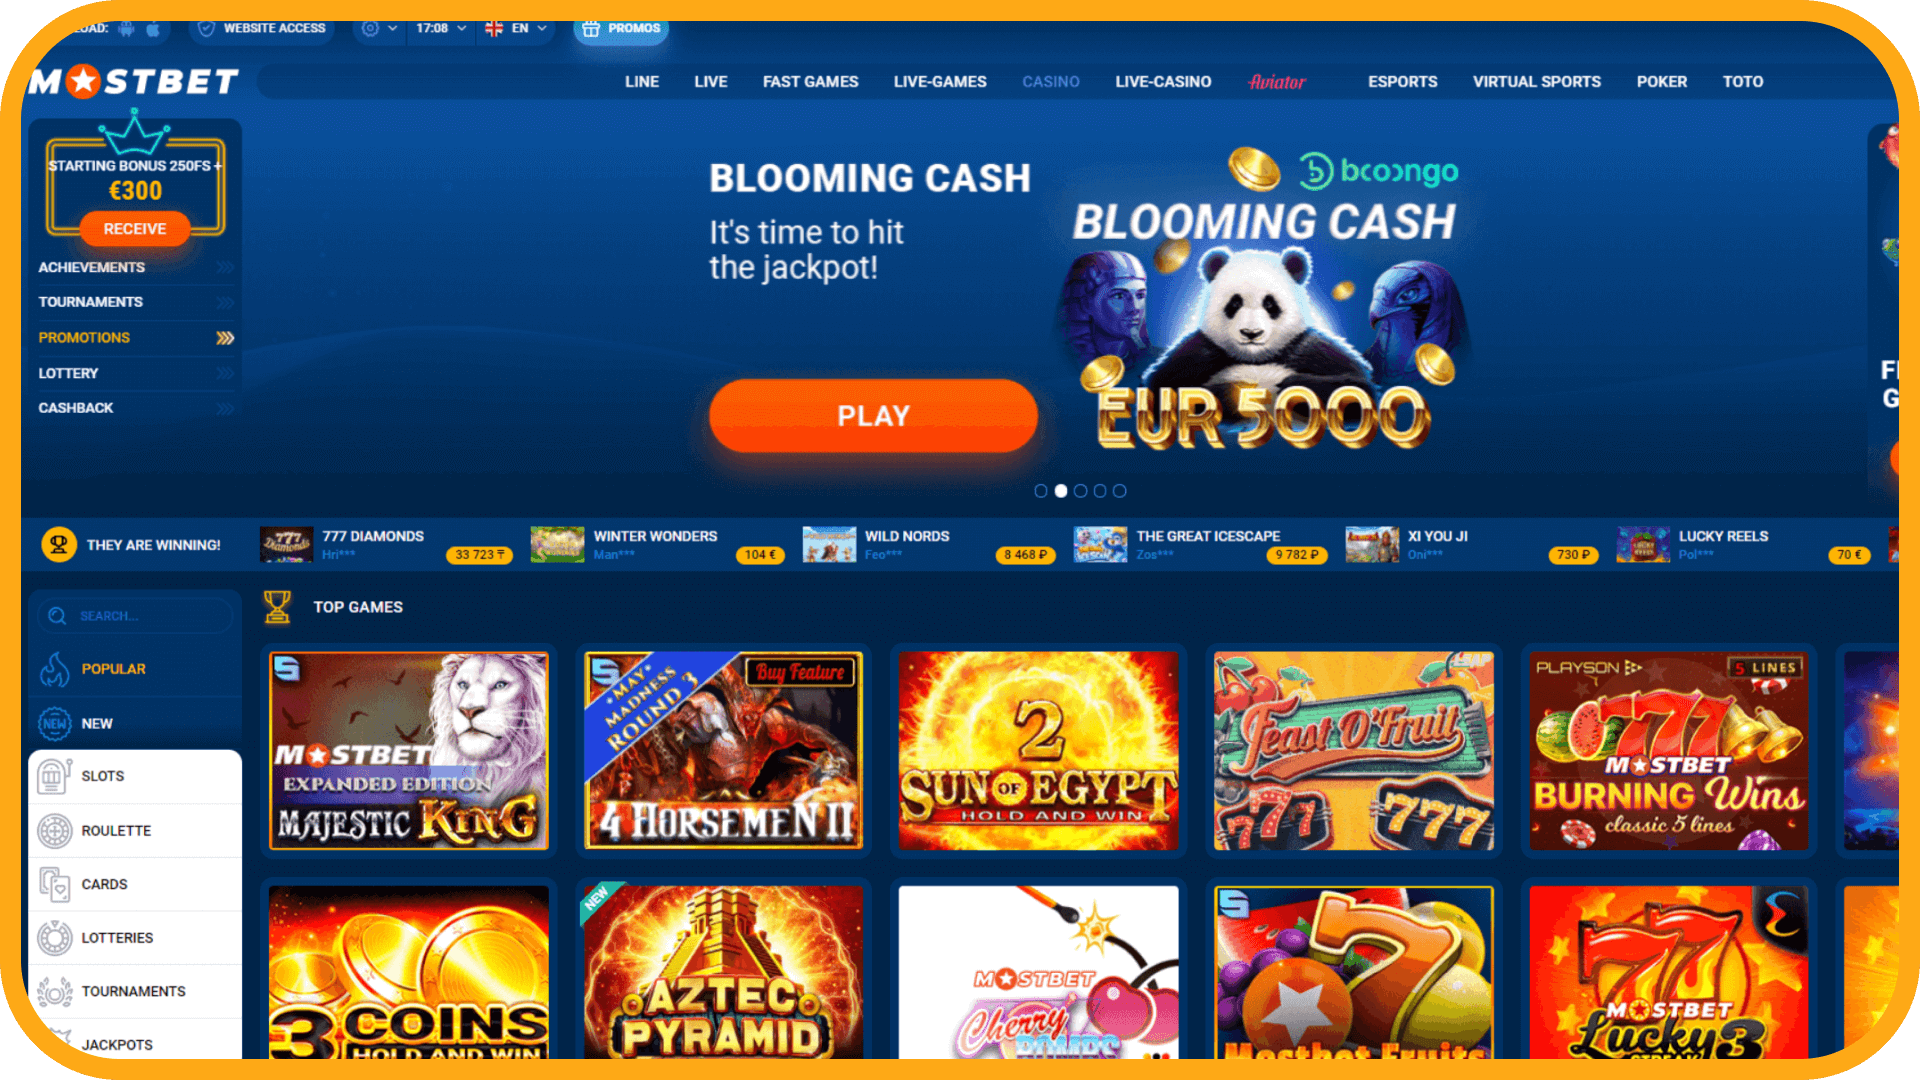 Mostbet Online Casino in Thailand - Play Exciting Games and Win: Back To Basics